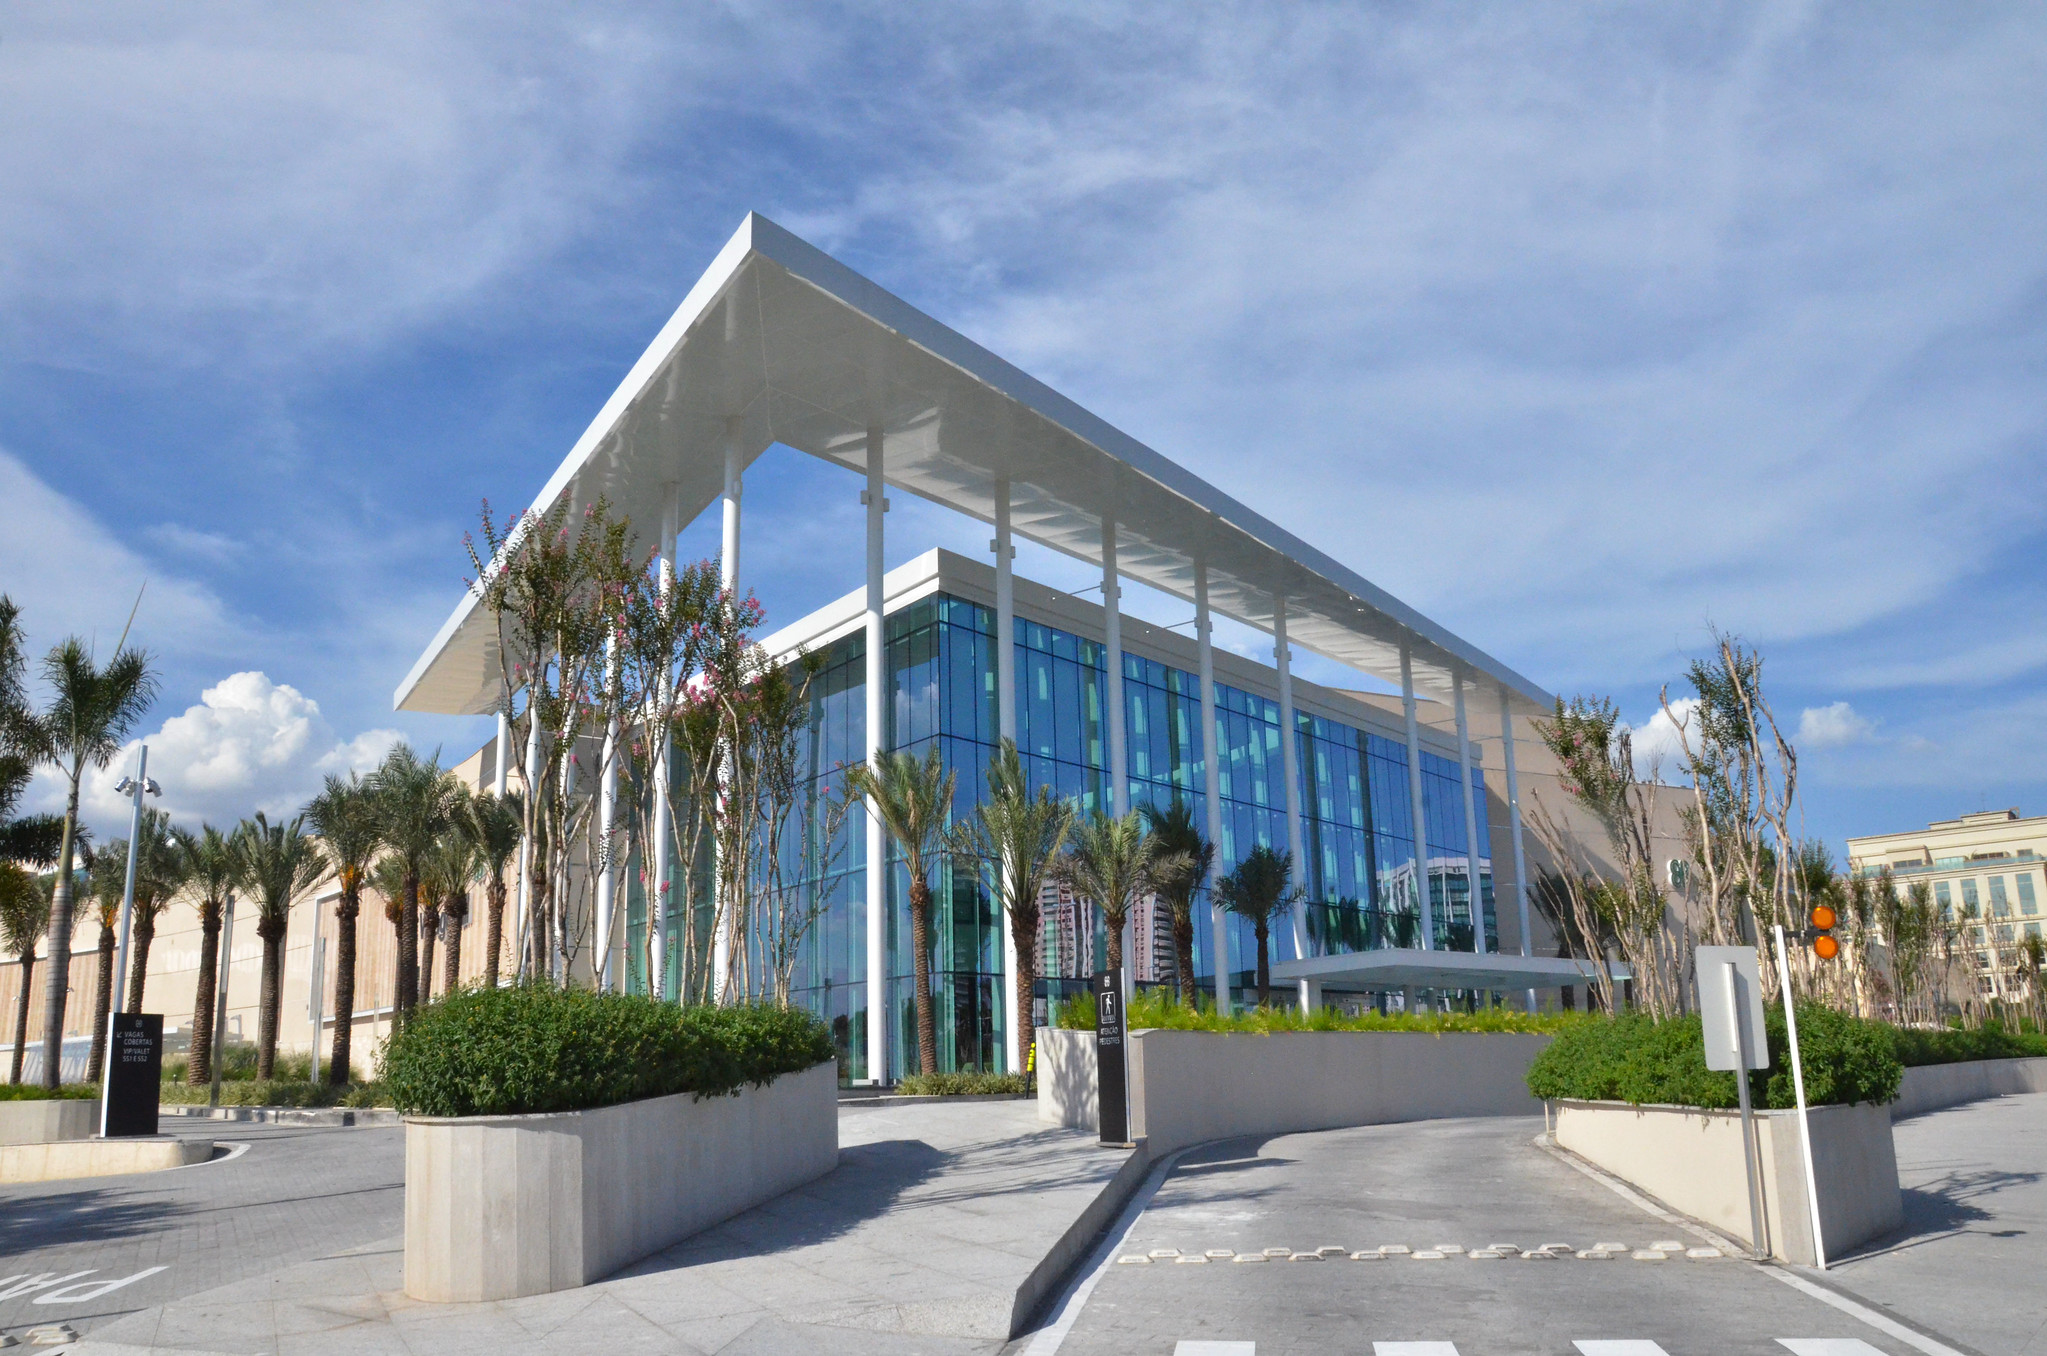 Exterior entranceway of the Village Mall in Barra Tijuca. A glass-fronted building. A wide sun shelter supported by pillars extends around the entranceway separate from the rest of the building. There are two roadways that pass along the front of the building and to the left of the entranceway. Pedestrian walkways are dotted with trees and cement planters.